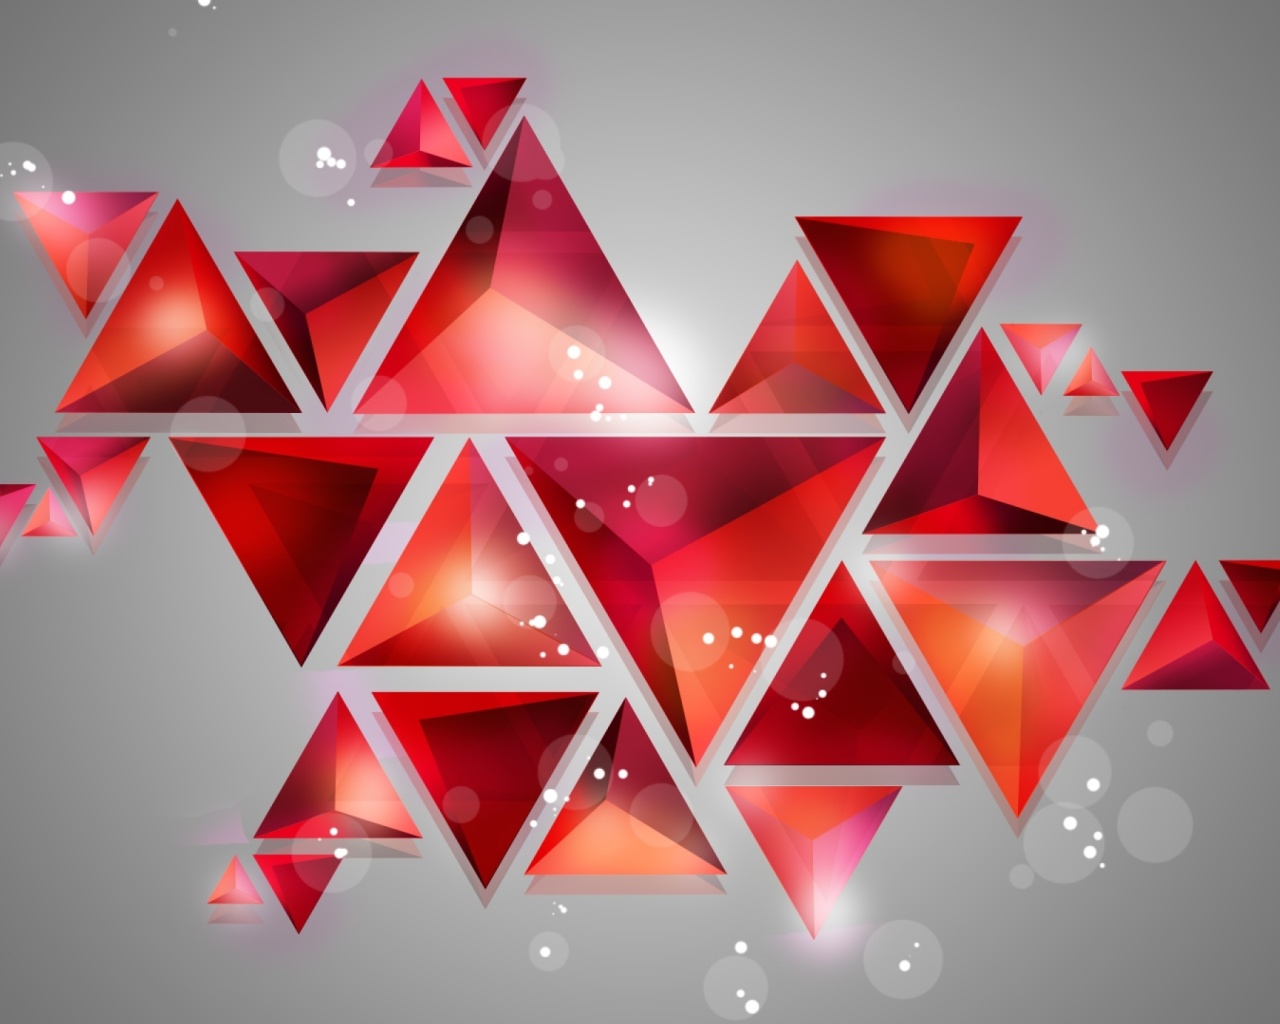 Das Geometry of red shades Wallpaper 1280x1024